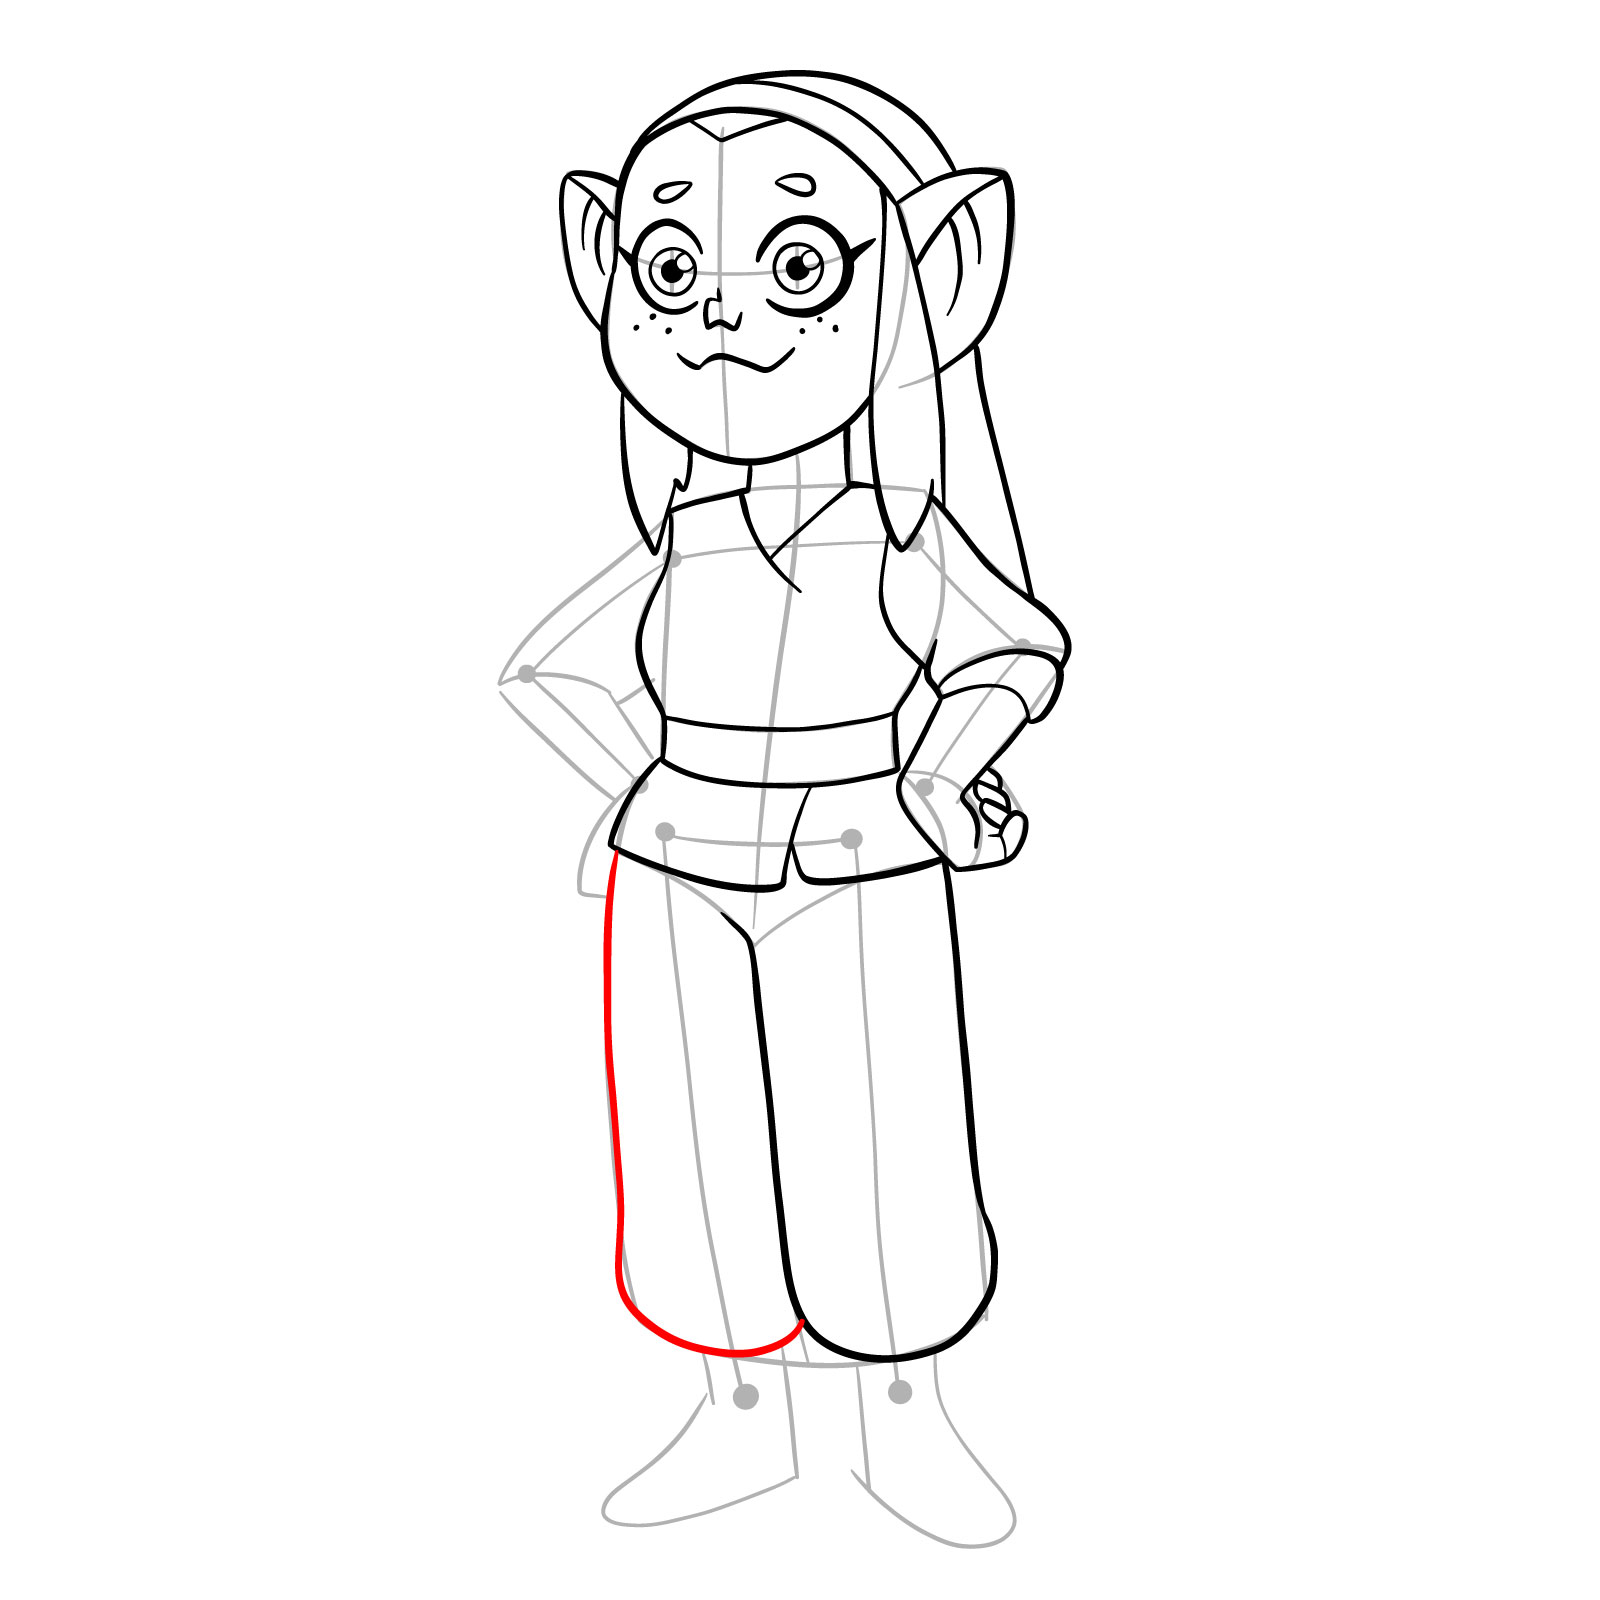 How to draw Amber from The Owl House - step 21